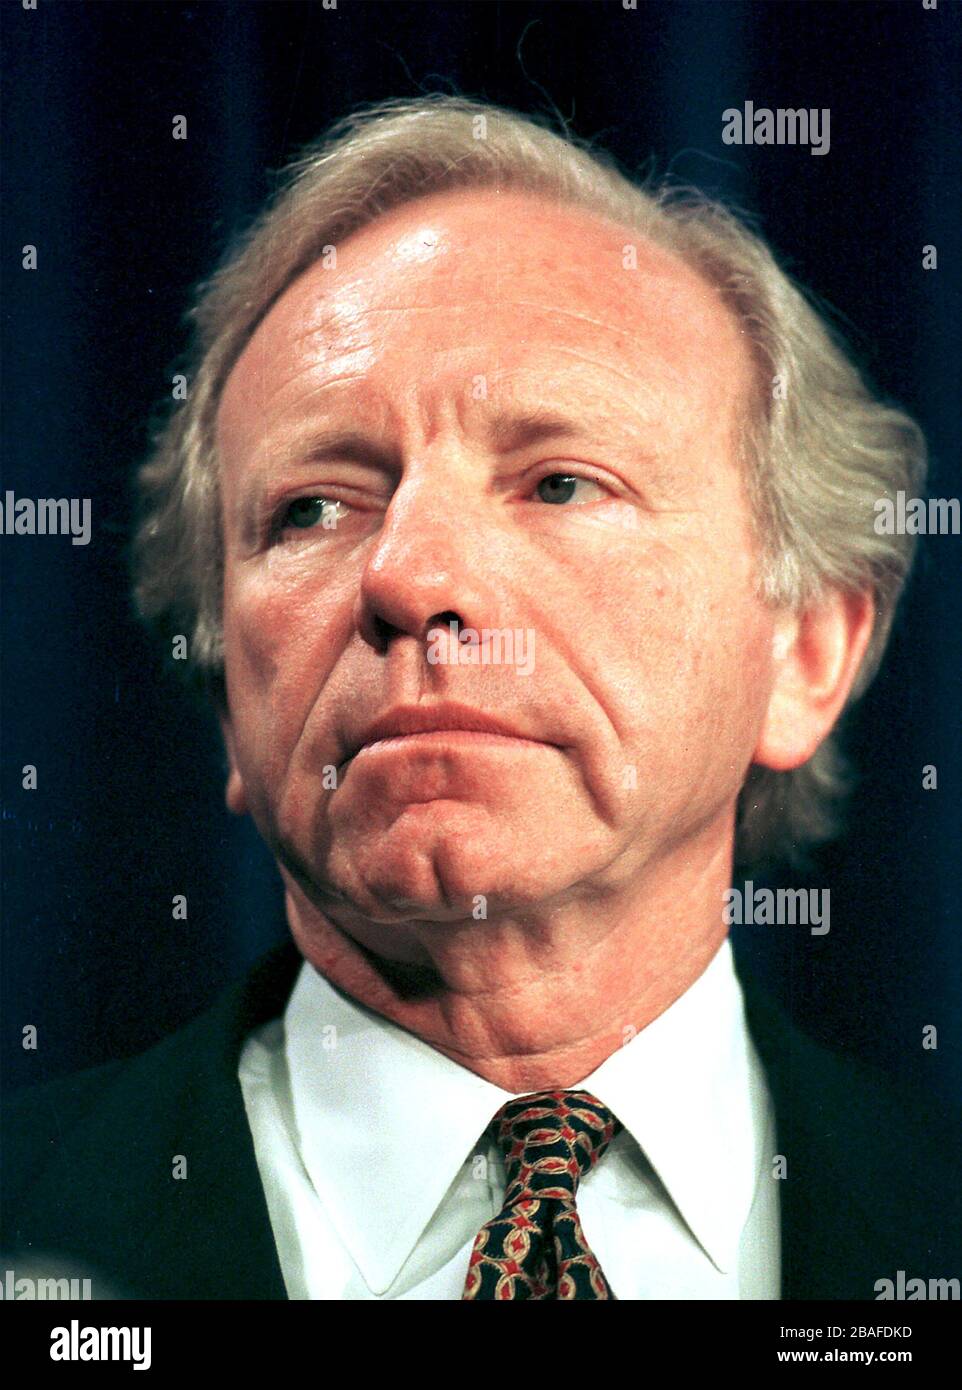 United States Senator Joseph Lieberman (Democrat of Connecticut), ranking member, US Senate Governmental Affairs Committee, releases statement 0n 5 August, 1999. The report describes the missteps, misunderstandings, and mistakes at all levels that resulted in the government's poor performance in the handling of the Wen-Ho Lee investigation. The committee held 13 hours of closed door hearings on 20 May, 1999 and 9 June, 1999 regarding the Wen-Ho Lee probe. It heard from 20 witnesses from the FBI, Department of Justice, Department of Energy, and Los Alamos Laboratory.Credit: Ron Sachs/CNP | Stock Photo